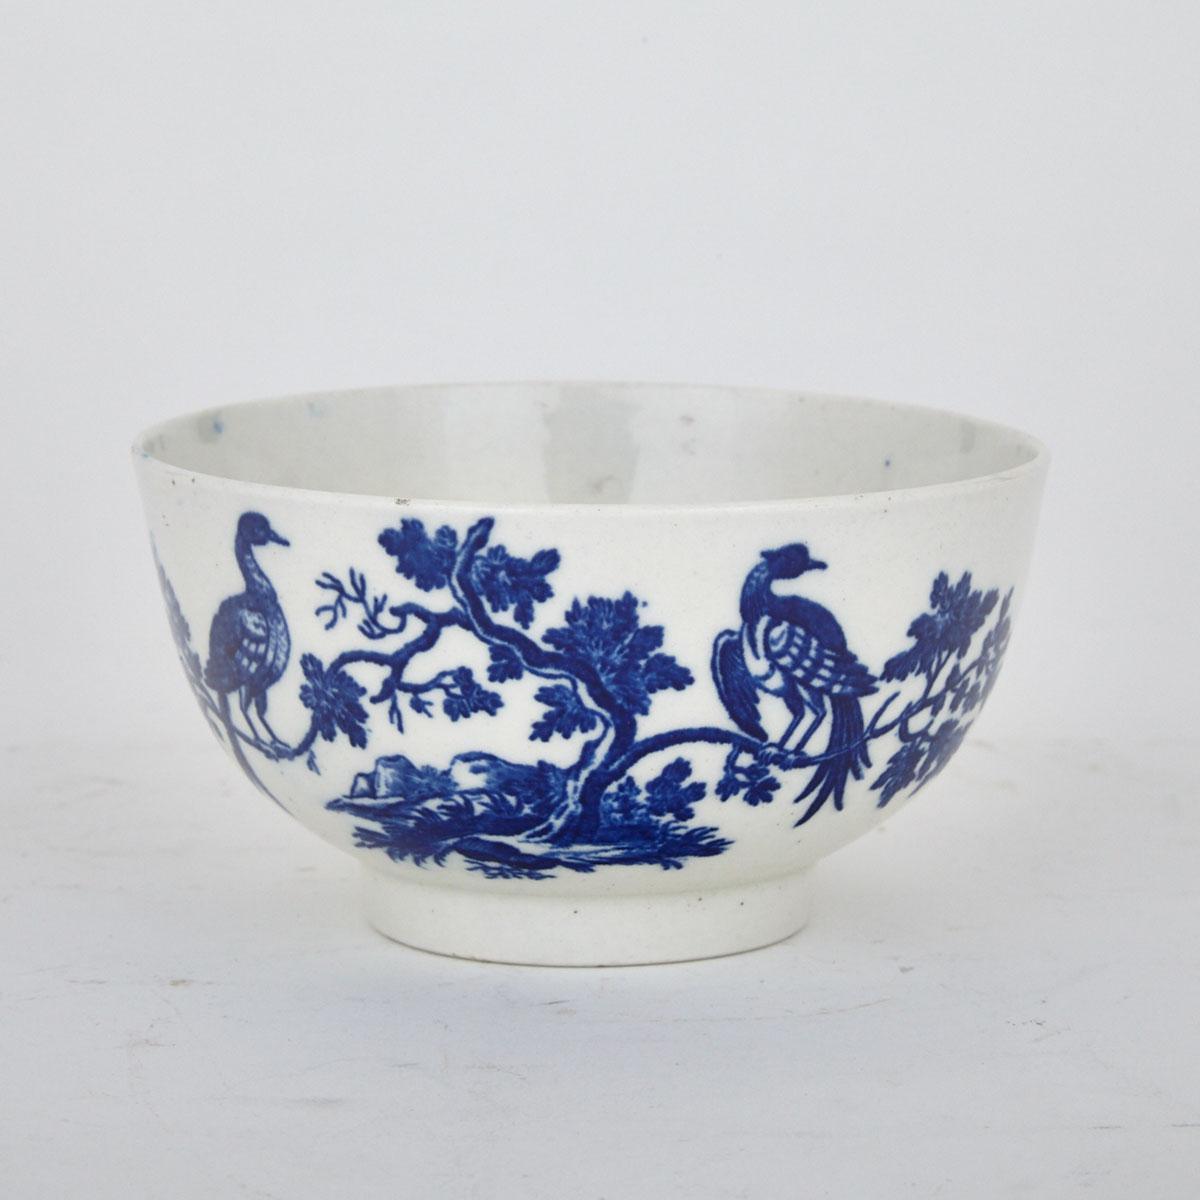 Worcester ‘Birds in Branches’ Small Bowl, c.1770-85